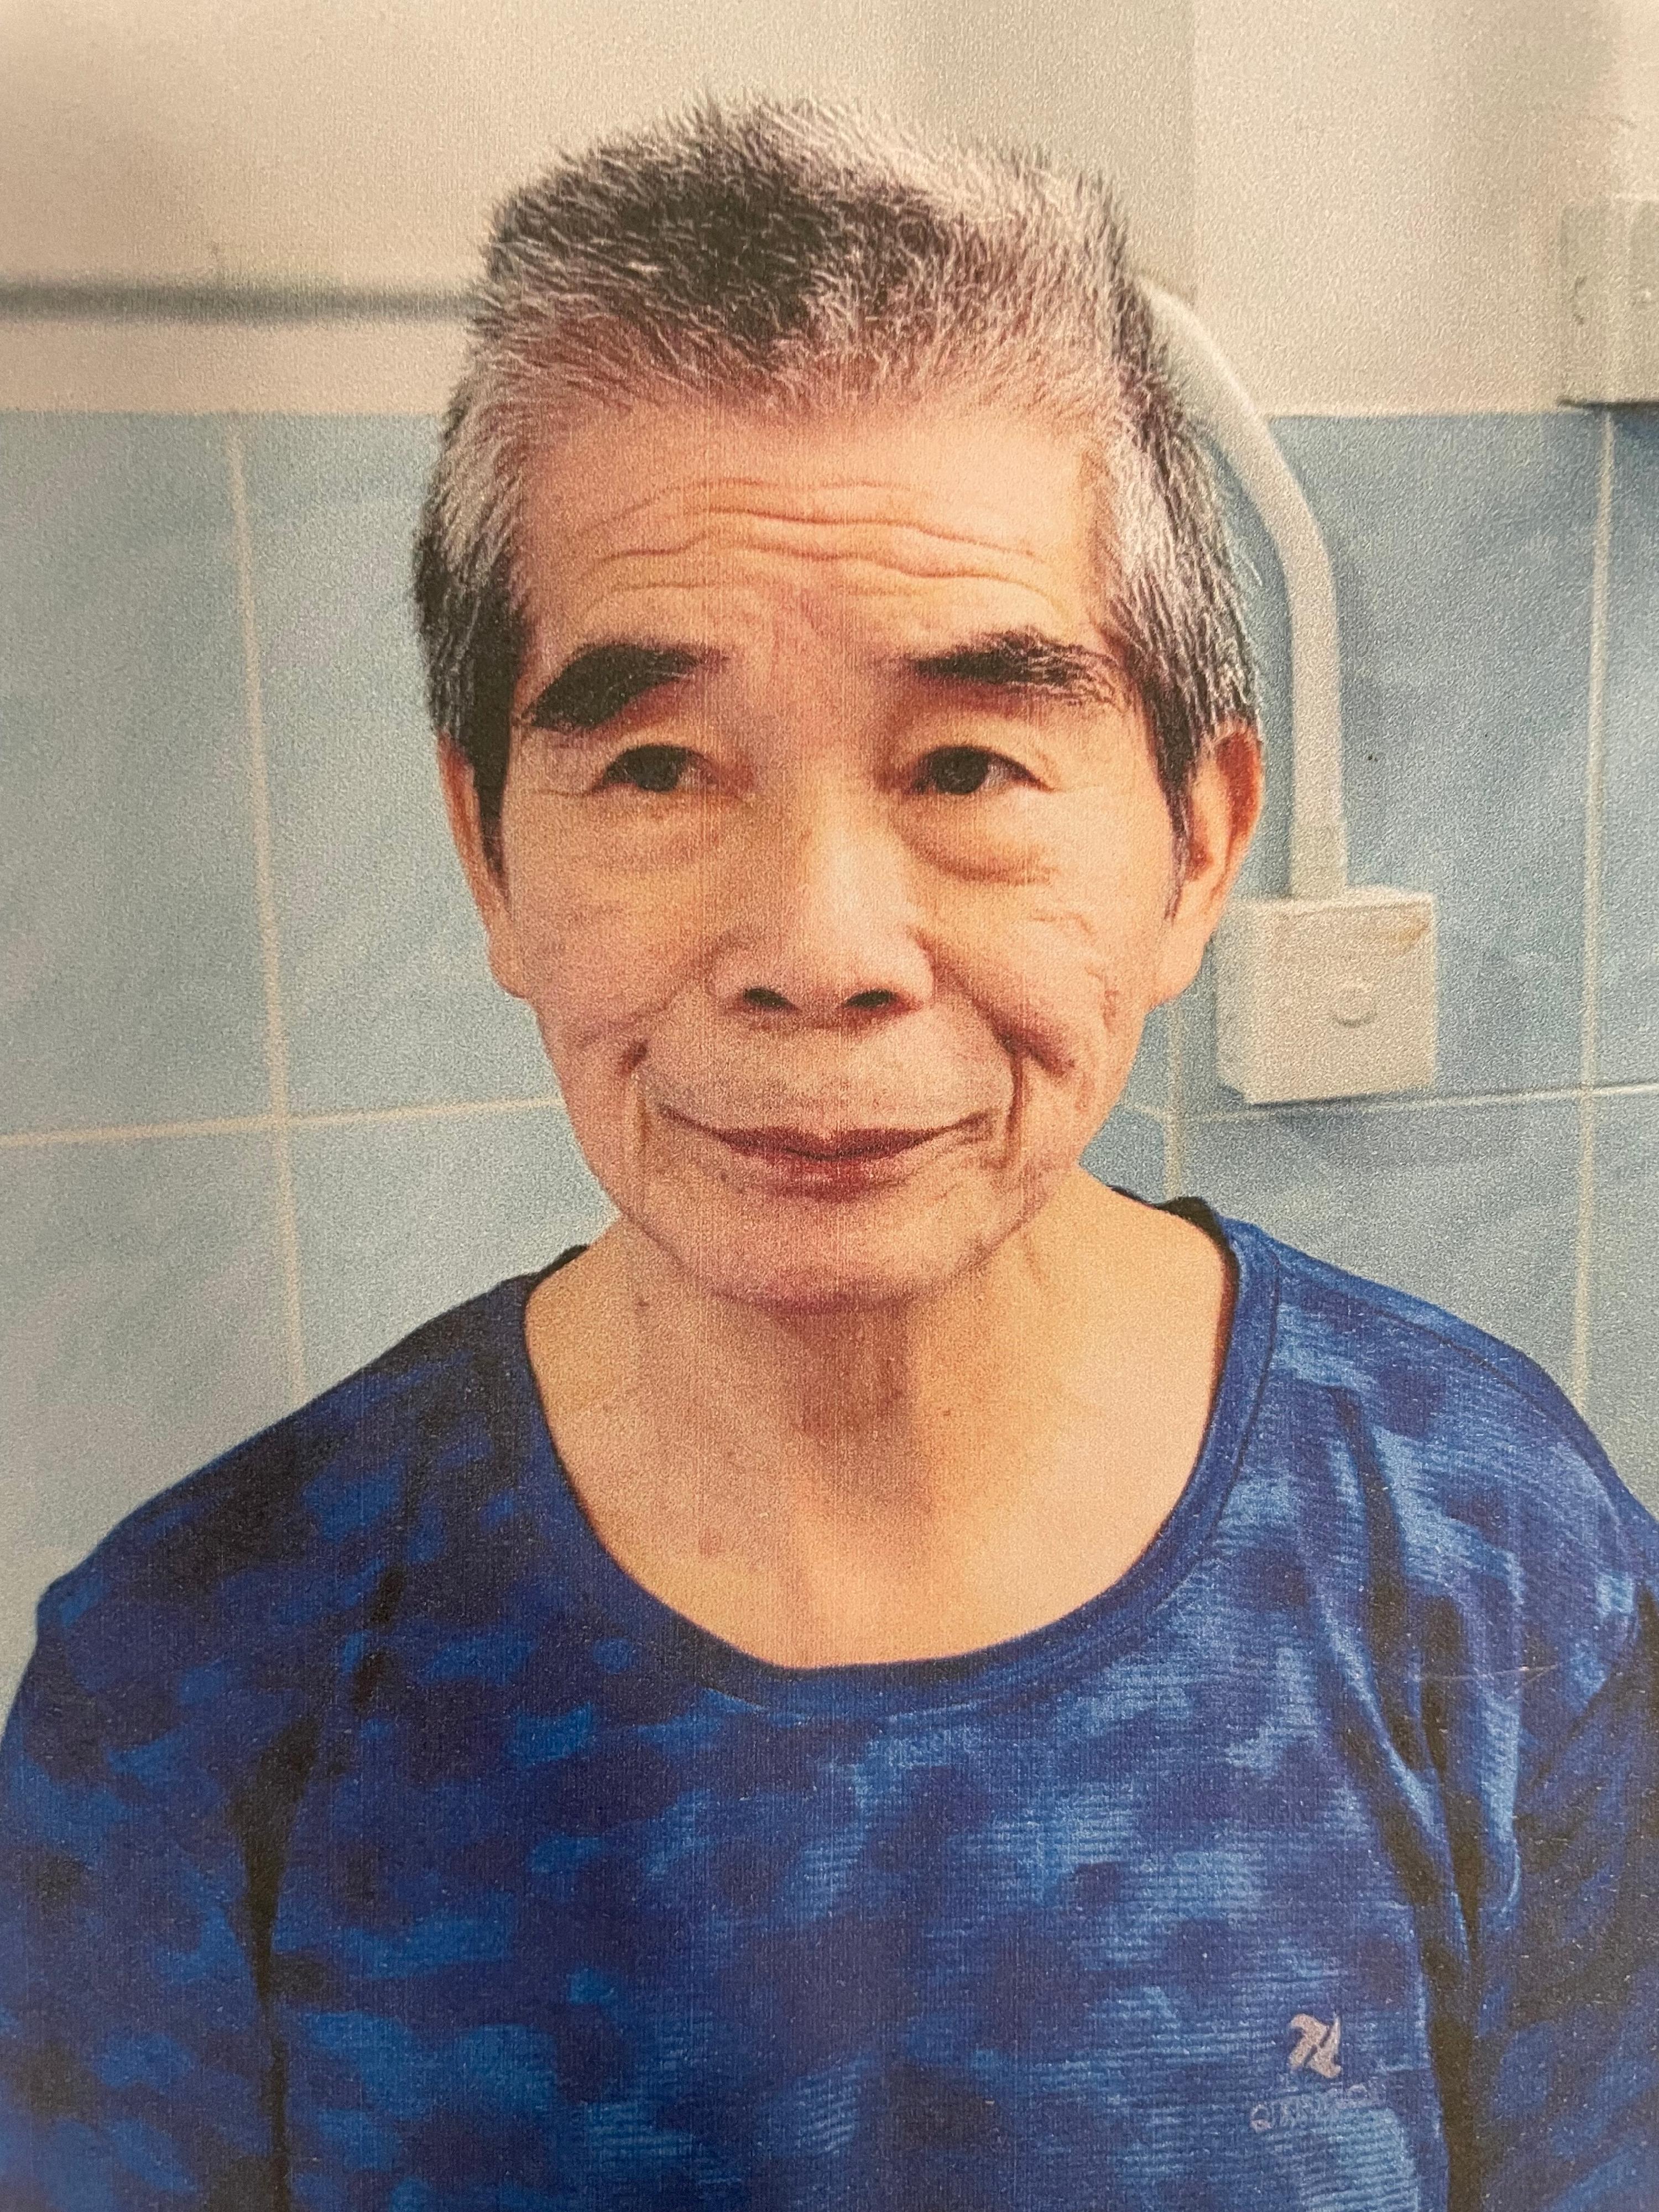 Chu Siu-ming, aged 71, is about 1.6 metres tall, 57 kilograms in weight and of thin build. He has a round face with yellow complexion and short grey hair. He was last seen wearing a grey short-sleeved shirt, dark-coloured shorts and dark-coloured slippers.